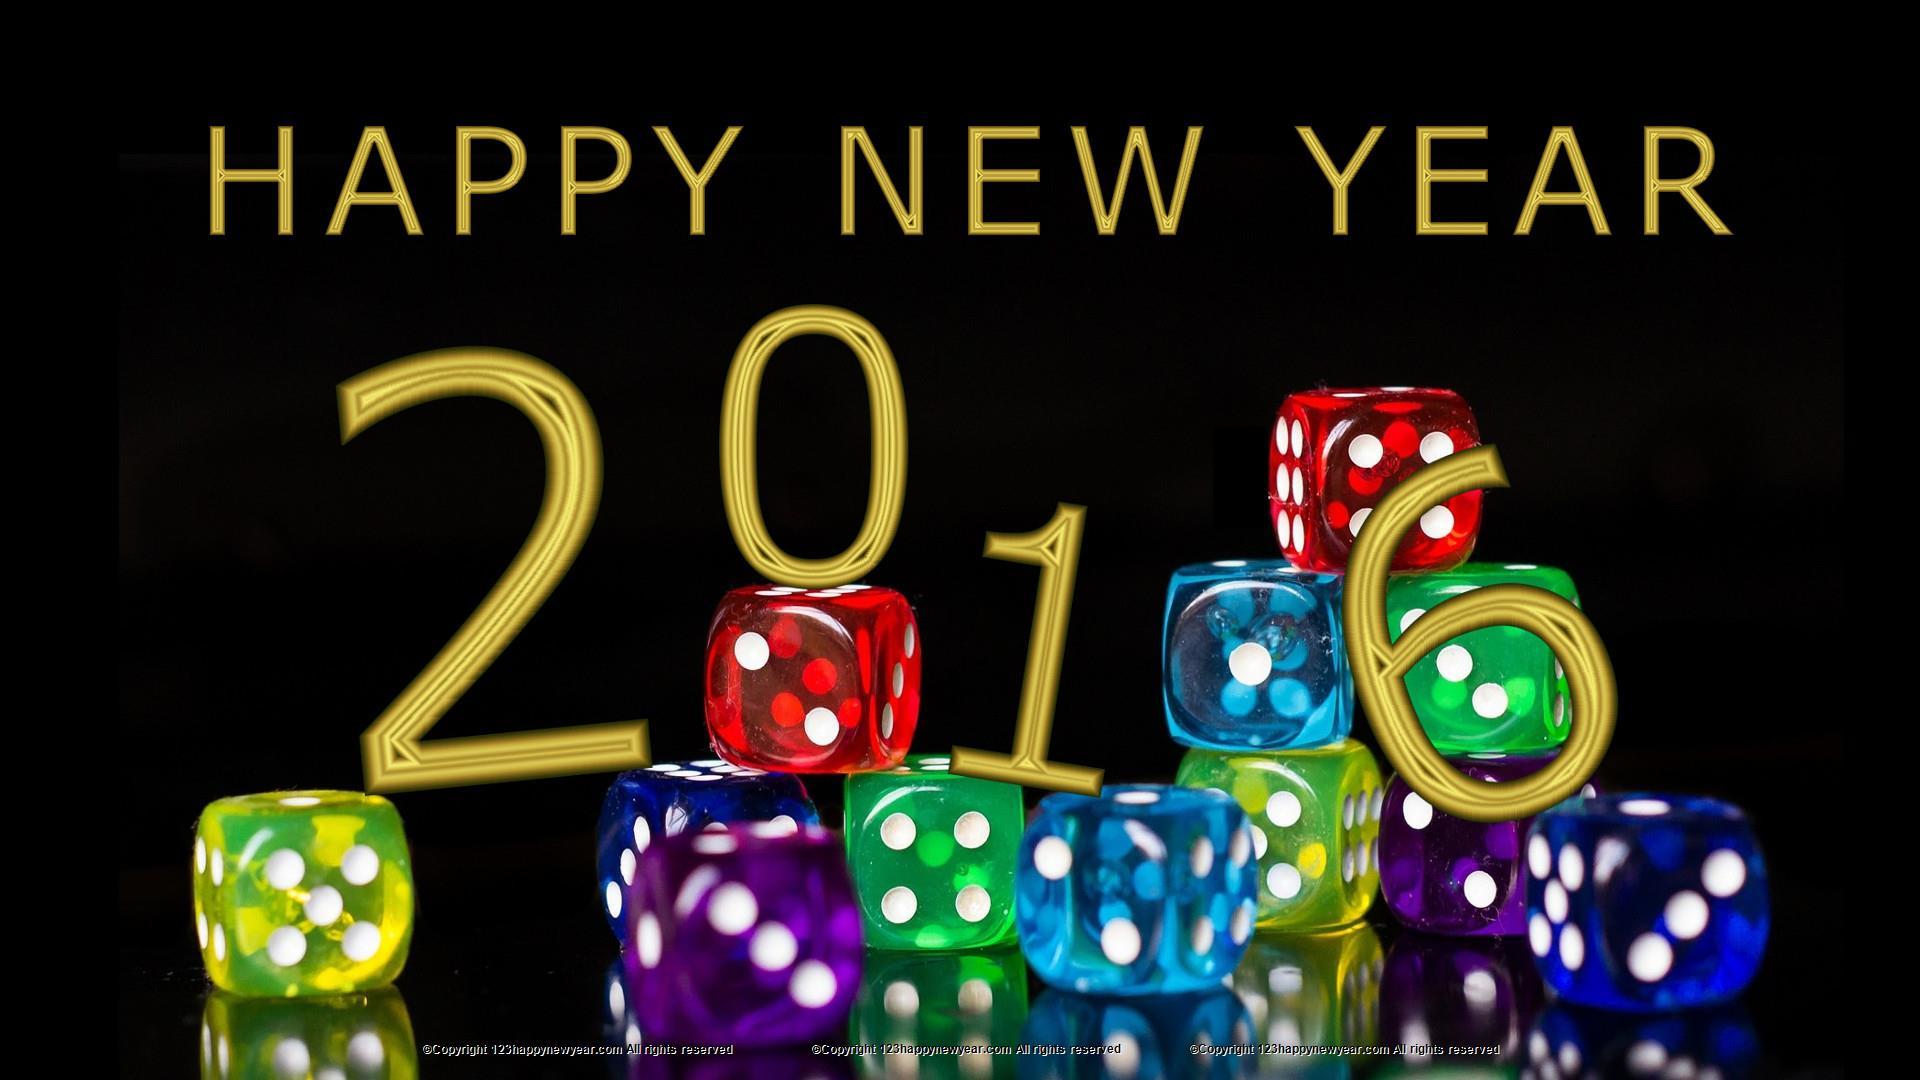 Happy new year 2016 wallpaper with dice